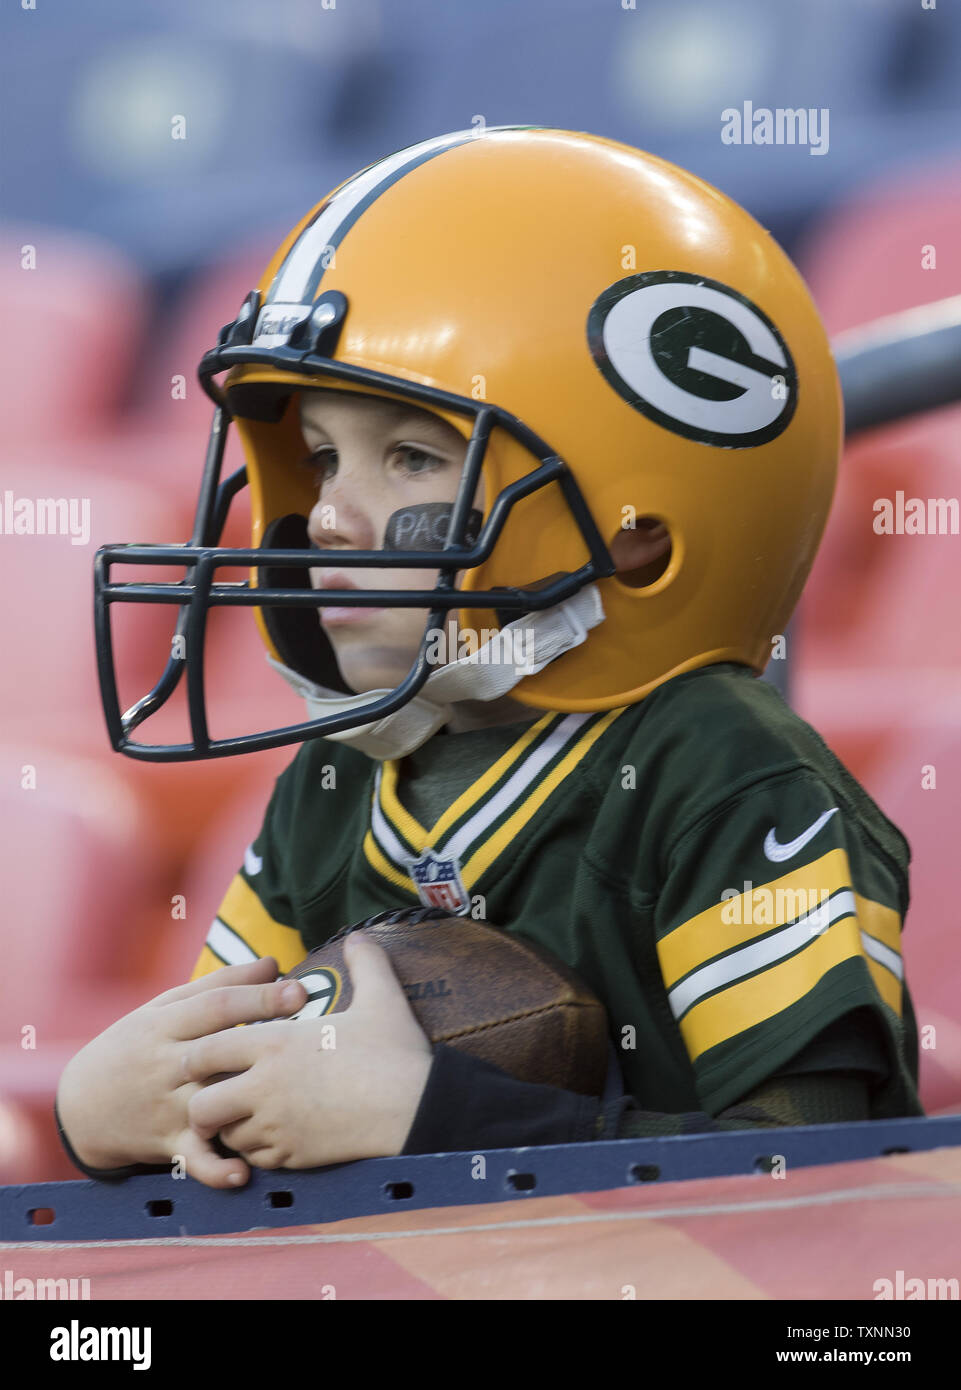 A very young Green Bay Packers fan wears his helmet at his first row seat watching warm ups at Sports Authority Field at Mile High in Denver on November 1, 2015. Photo